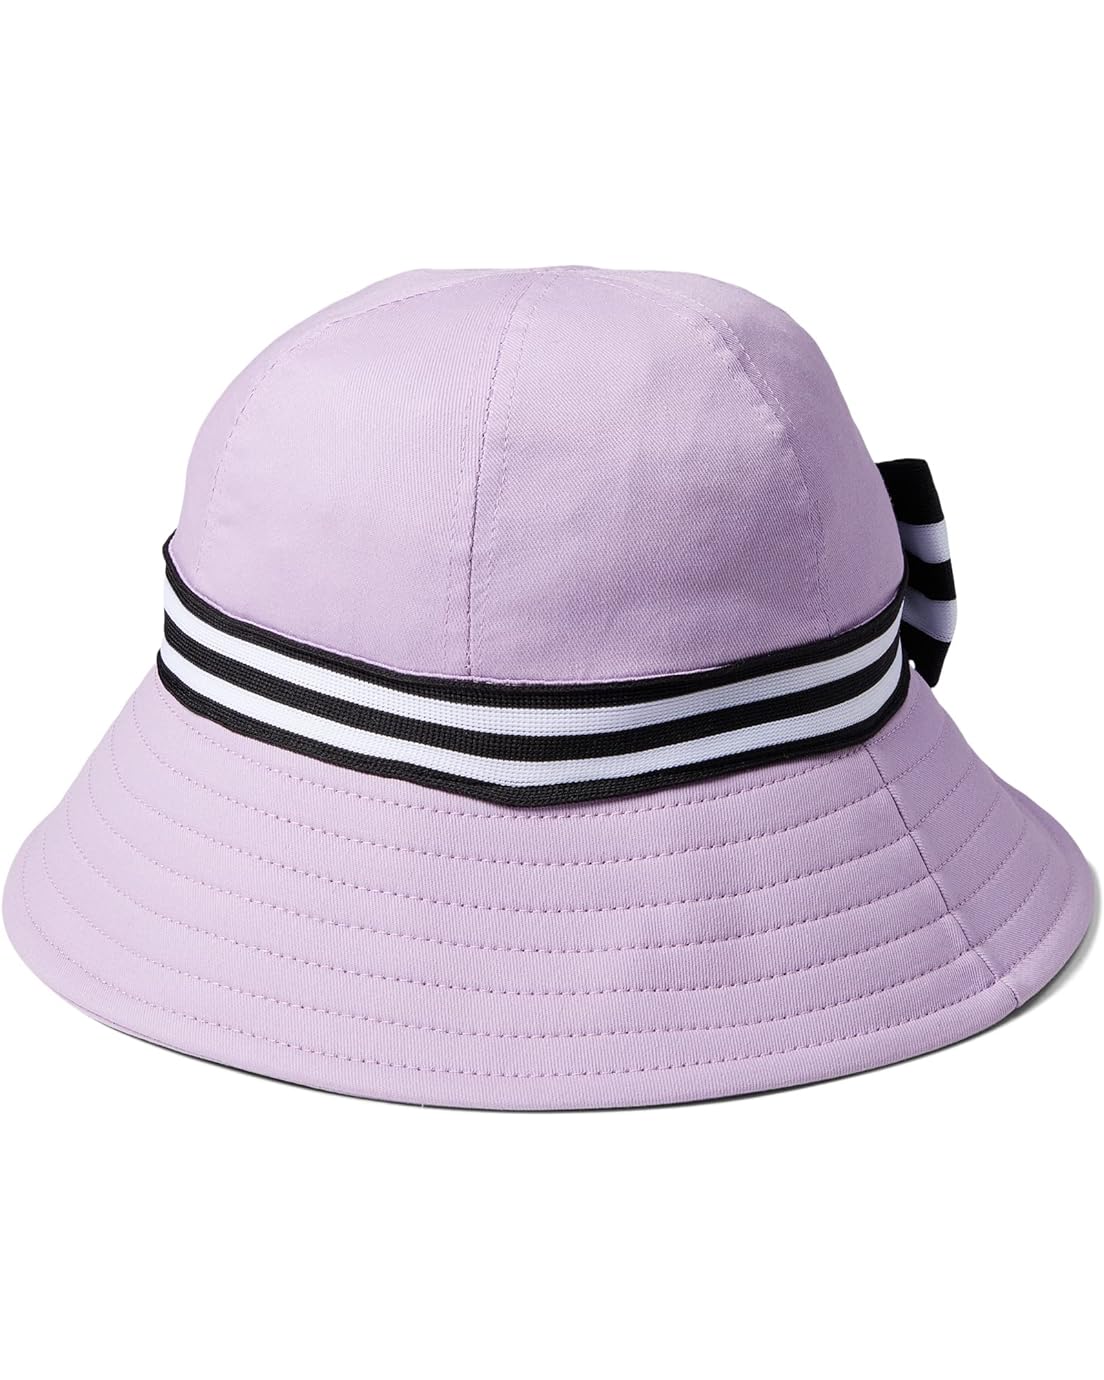 Badgley Mischka Canvas Bucket Hat with Striped Ribbon and Bow